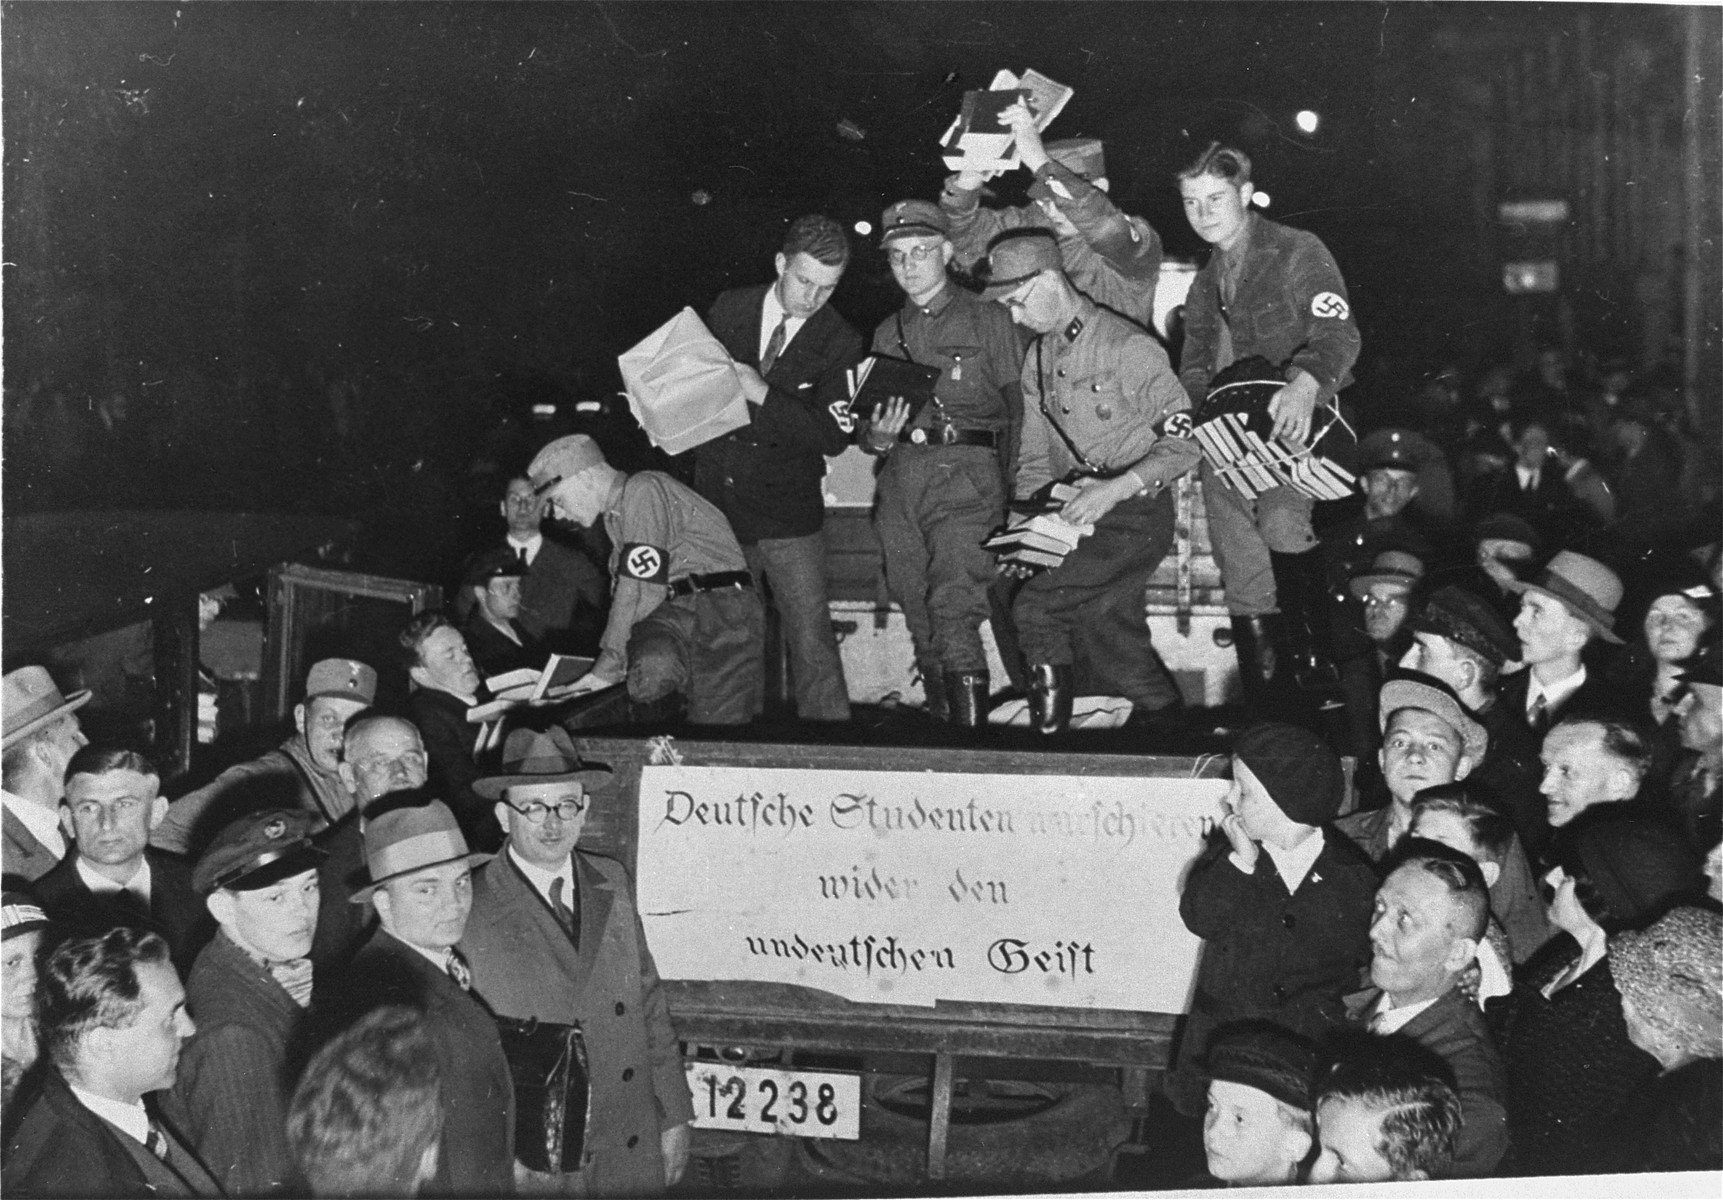 Nazi students unload confiscated materials for the public book burning that is to take place on the Opernplatz in Berlin.  The banner on the back of the truck reads: "German students march against the un-German spirit."